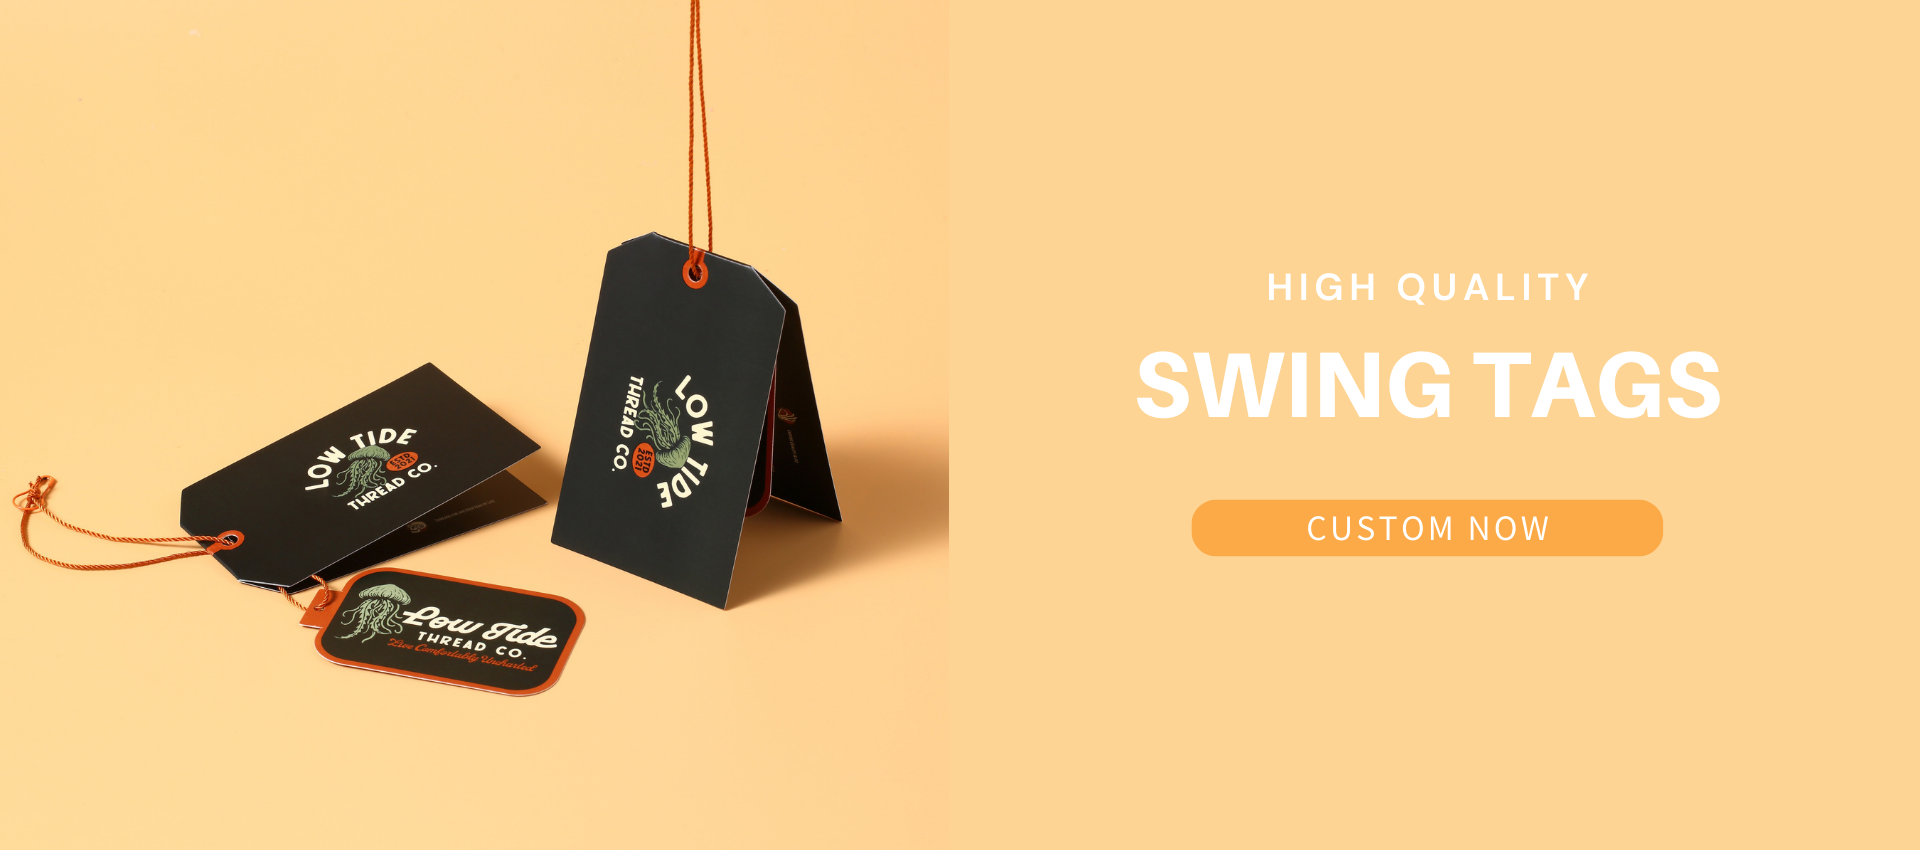 HIGH QUALITY SWING TAGS